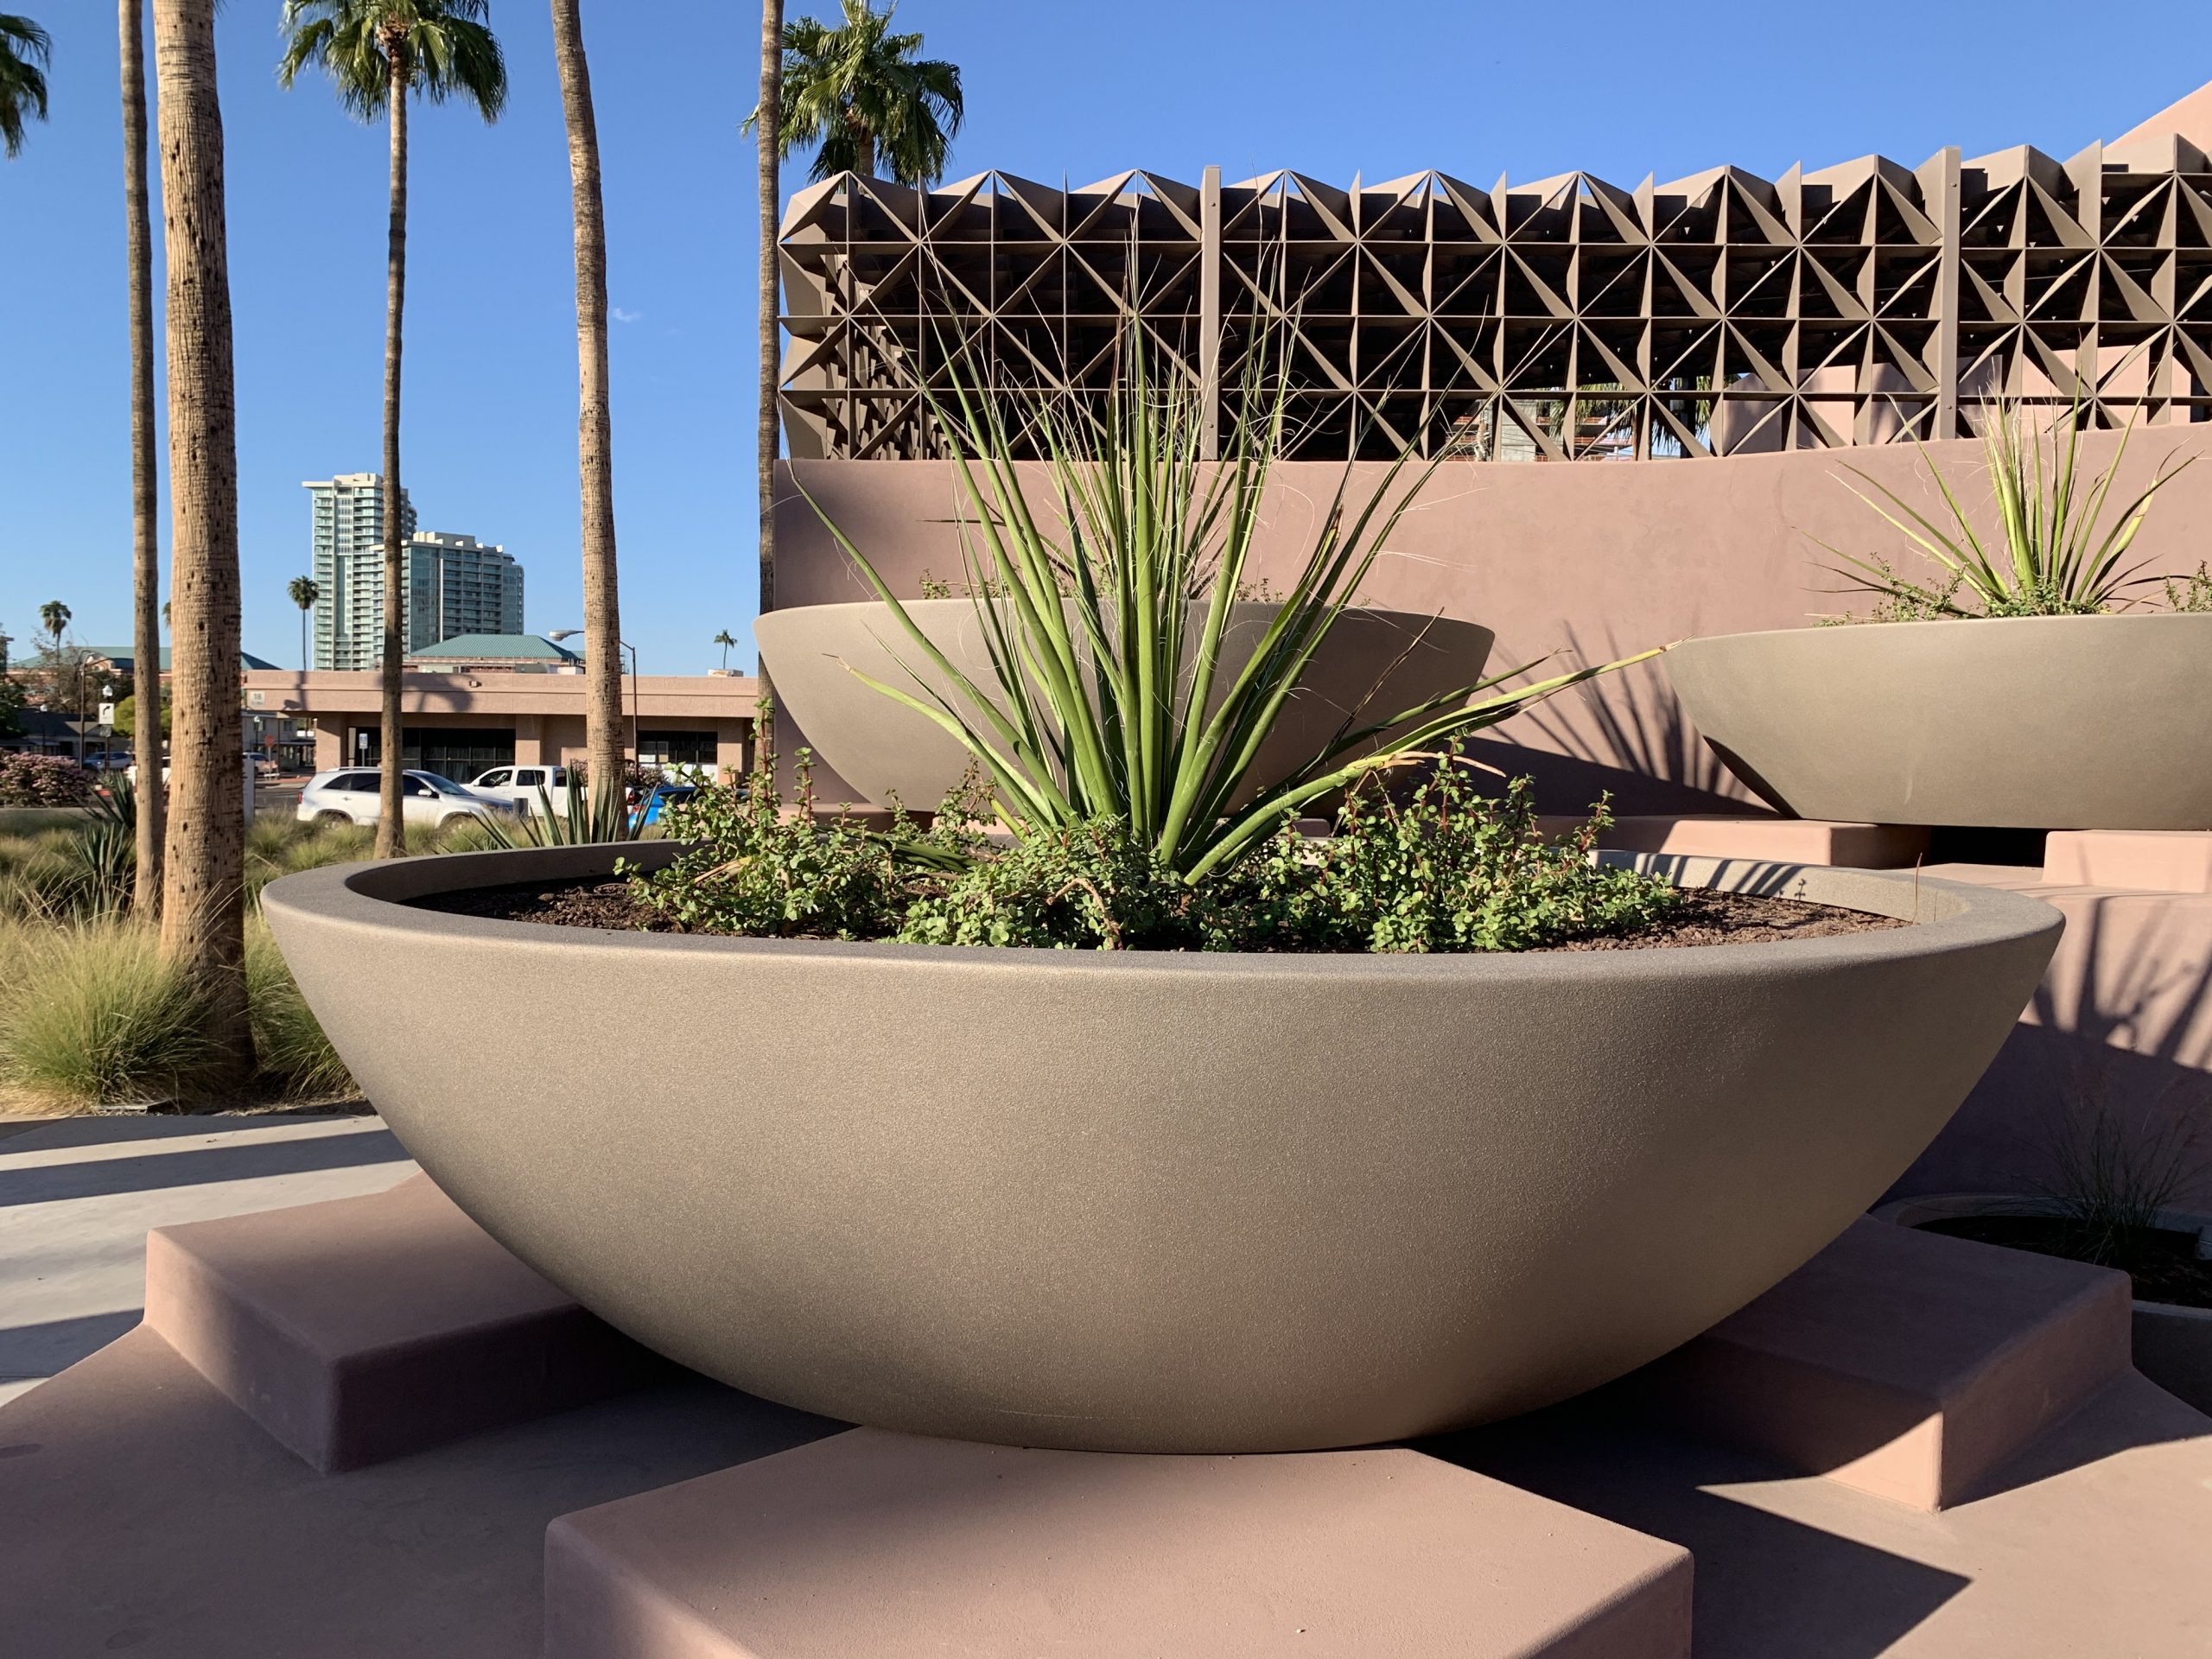 8' diameter Lido bowls are front and center